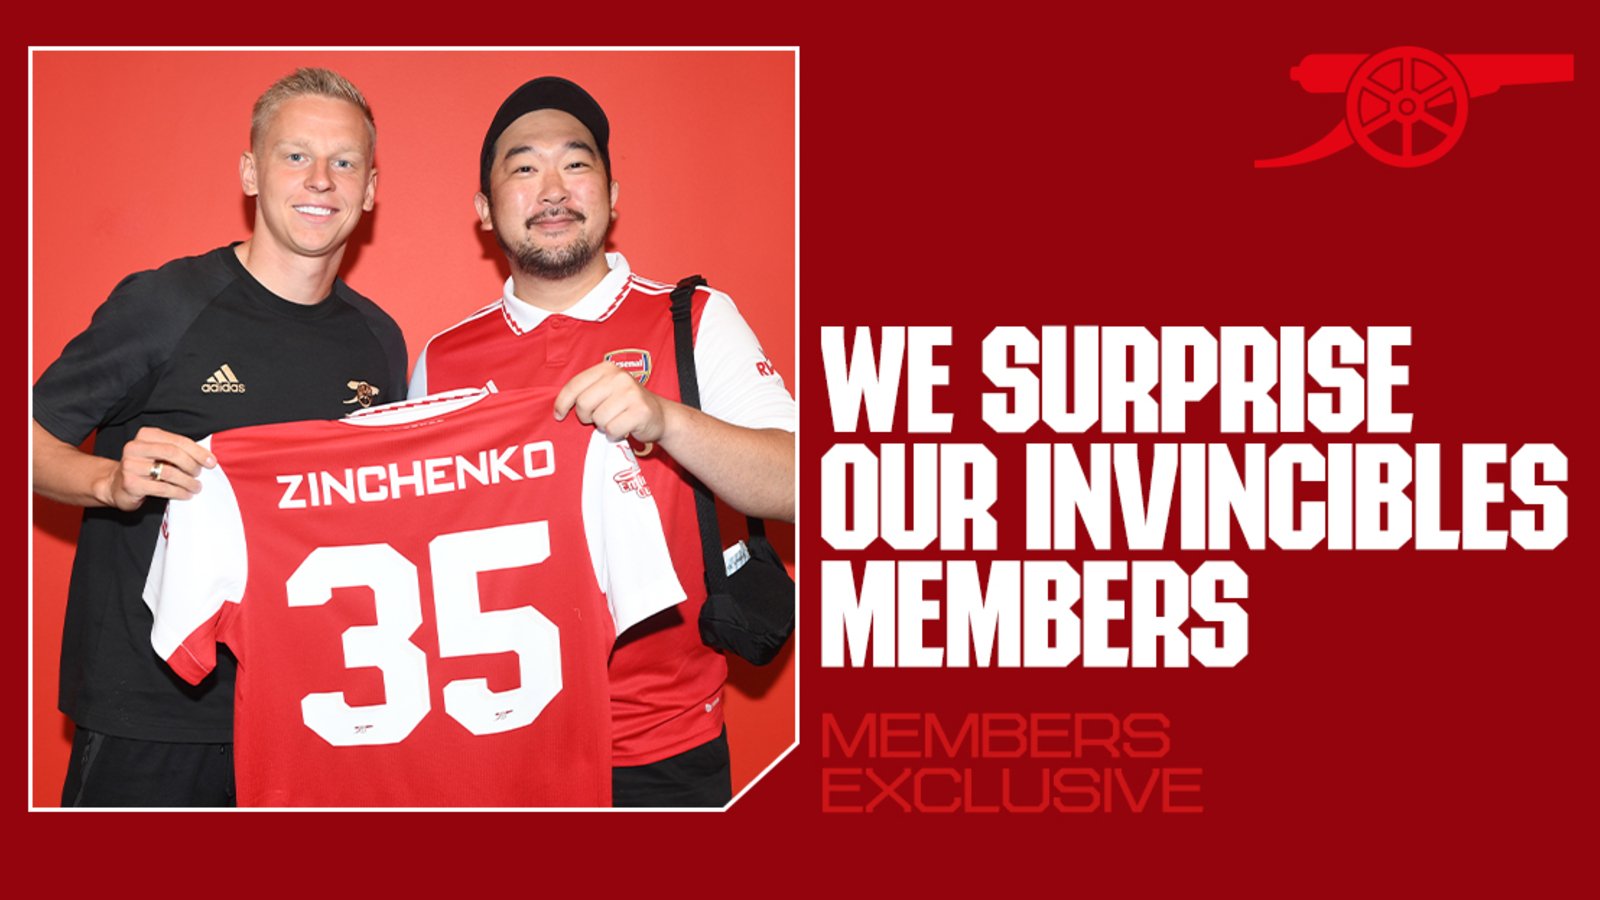 Huge surprise for our 'Invincibles' members